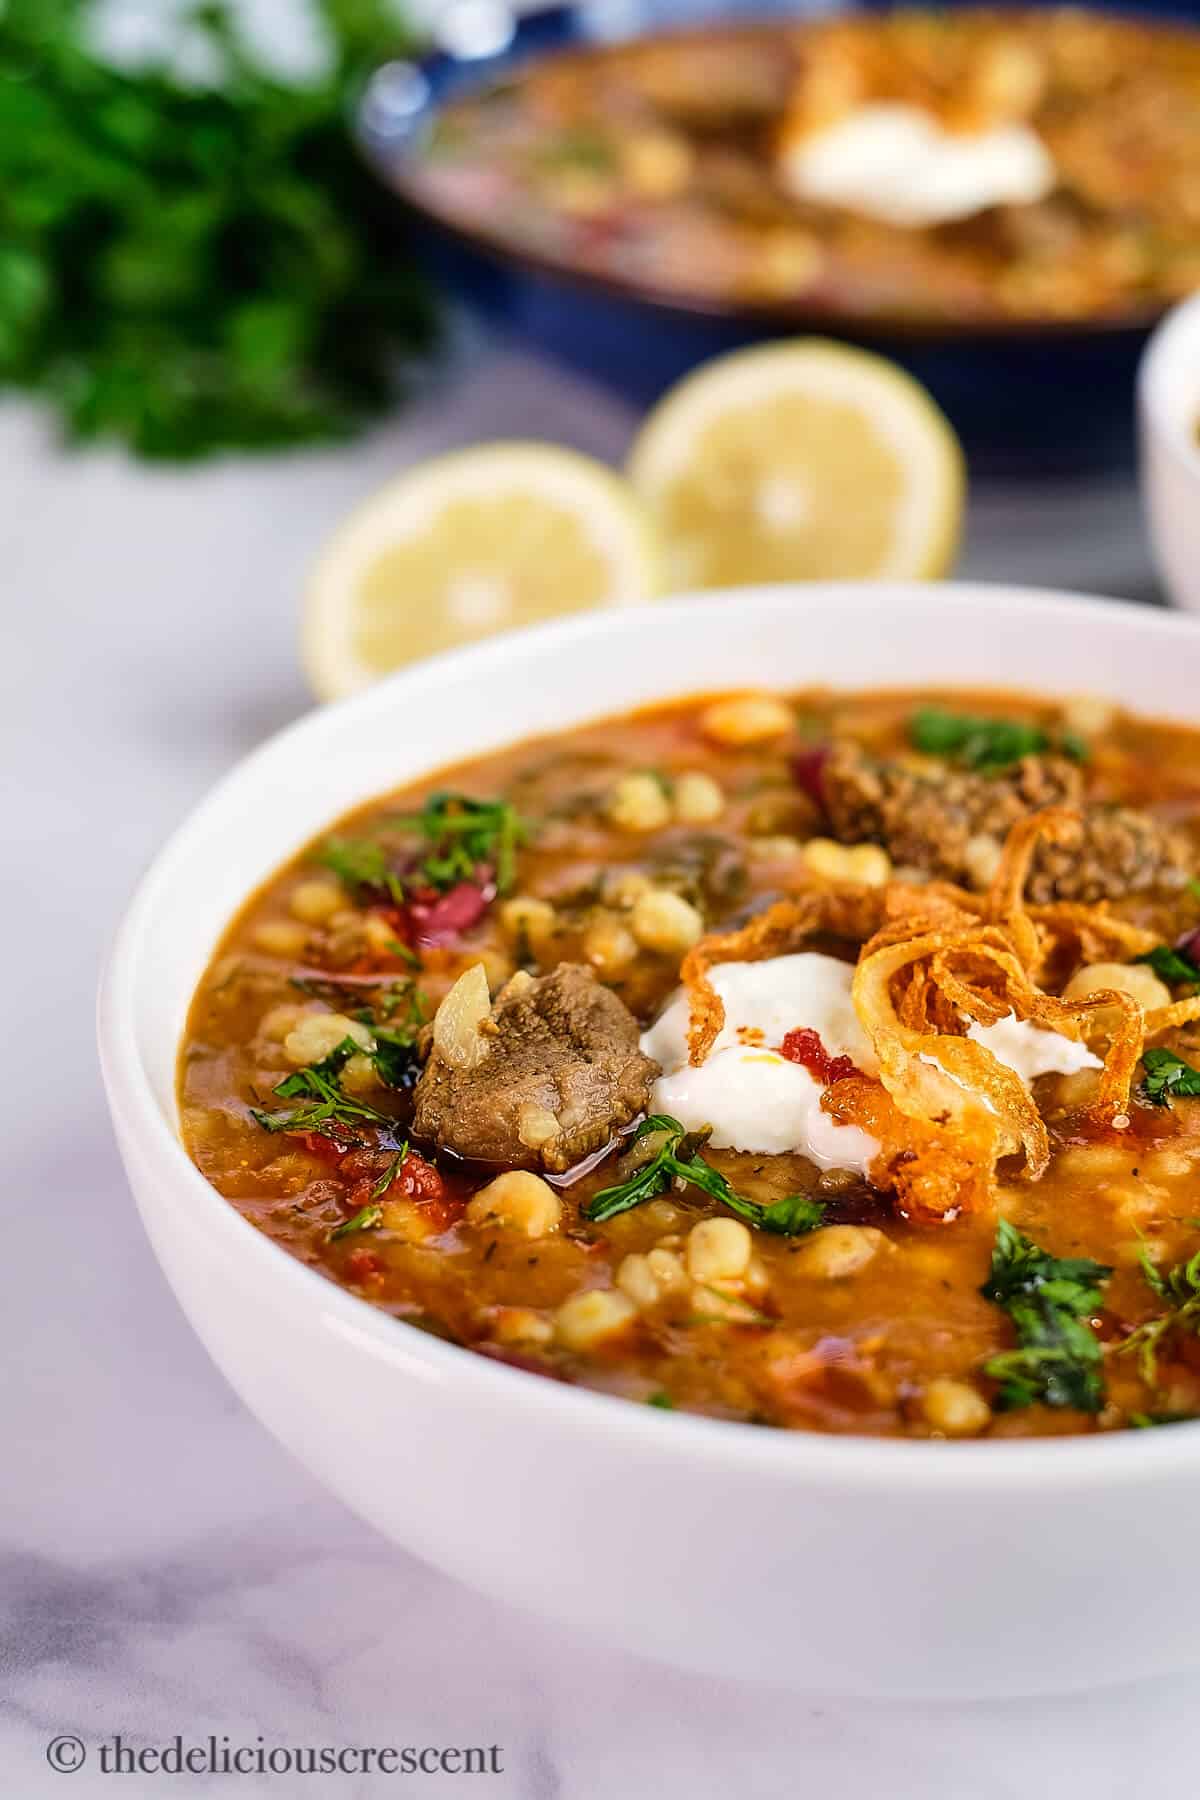 Persian style soup made with beef and barley.